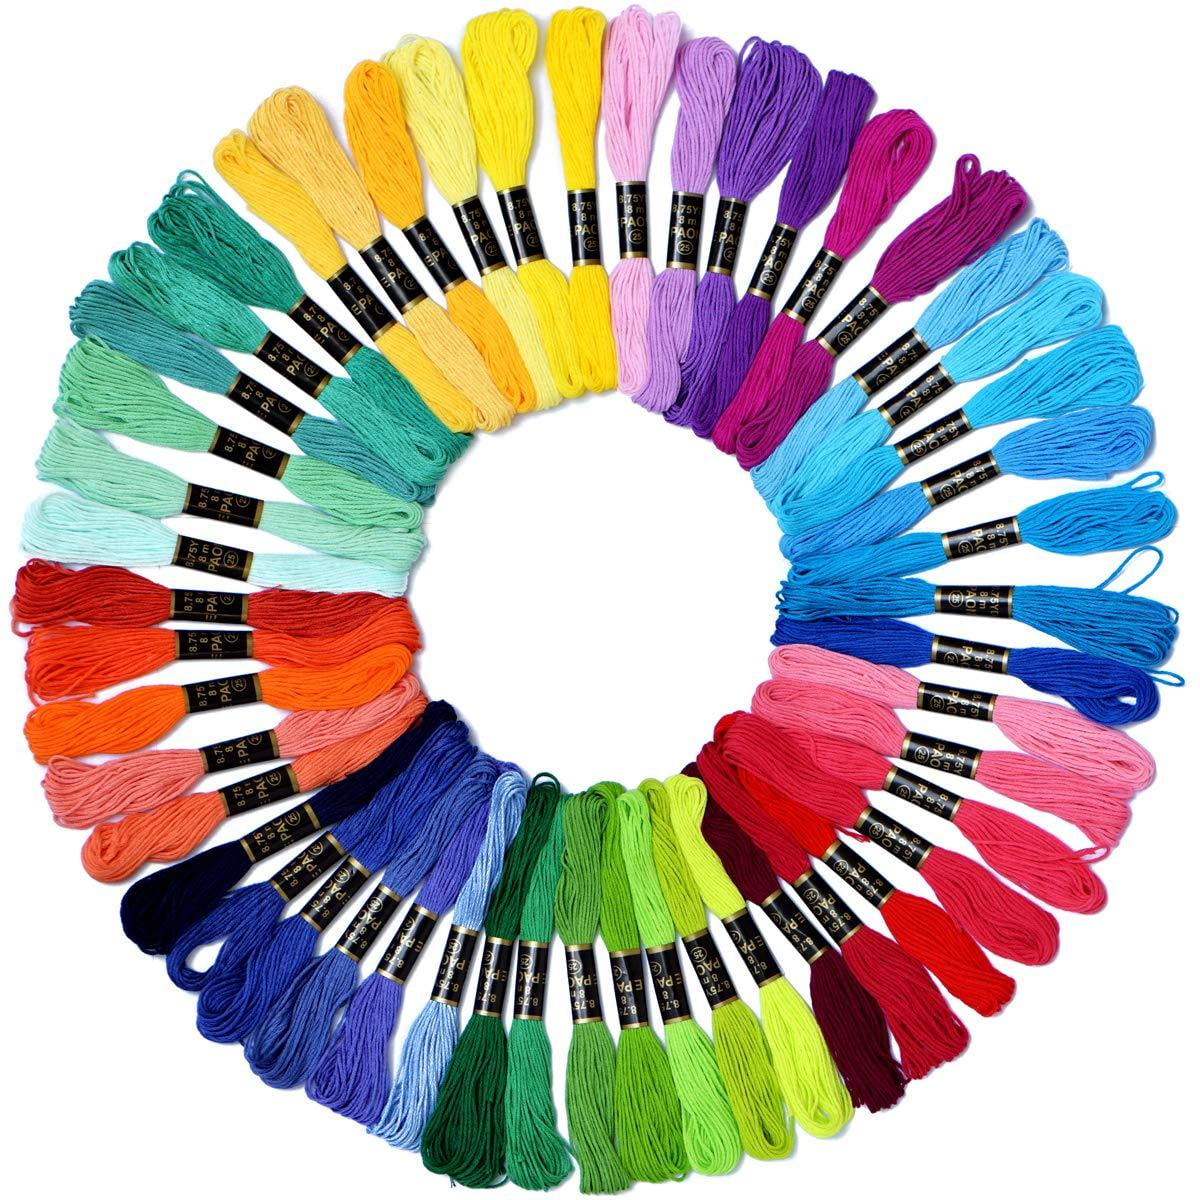 Embroidery Floss Rainbow Color, 250 Skeins Friendship Bracelet String Kit  with 12 White & Black Embroidery Thread, 36 Plastic Floss Bobbins for Cross